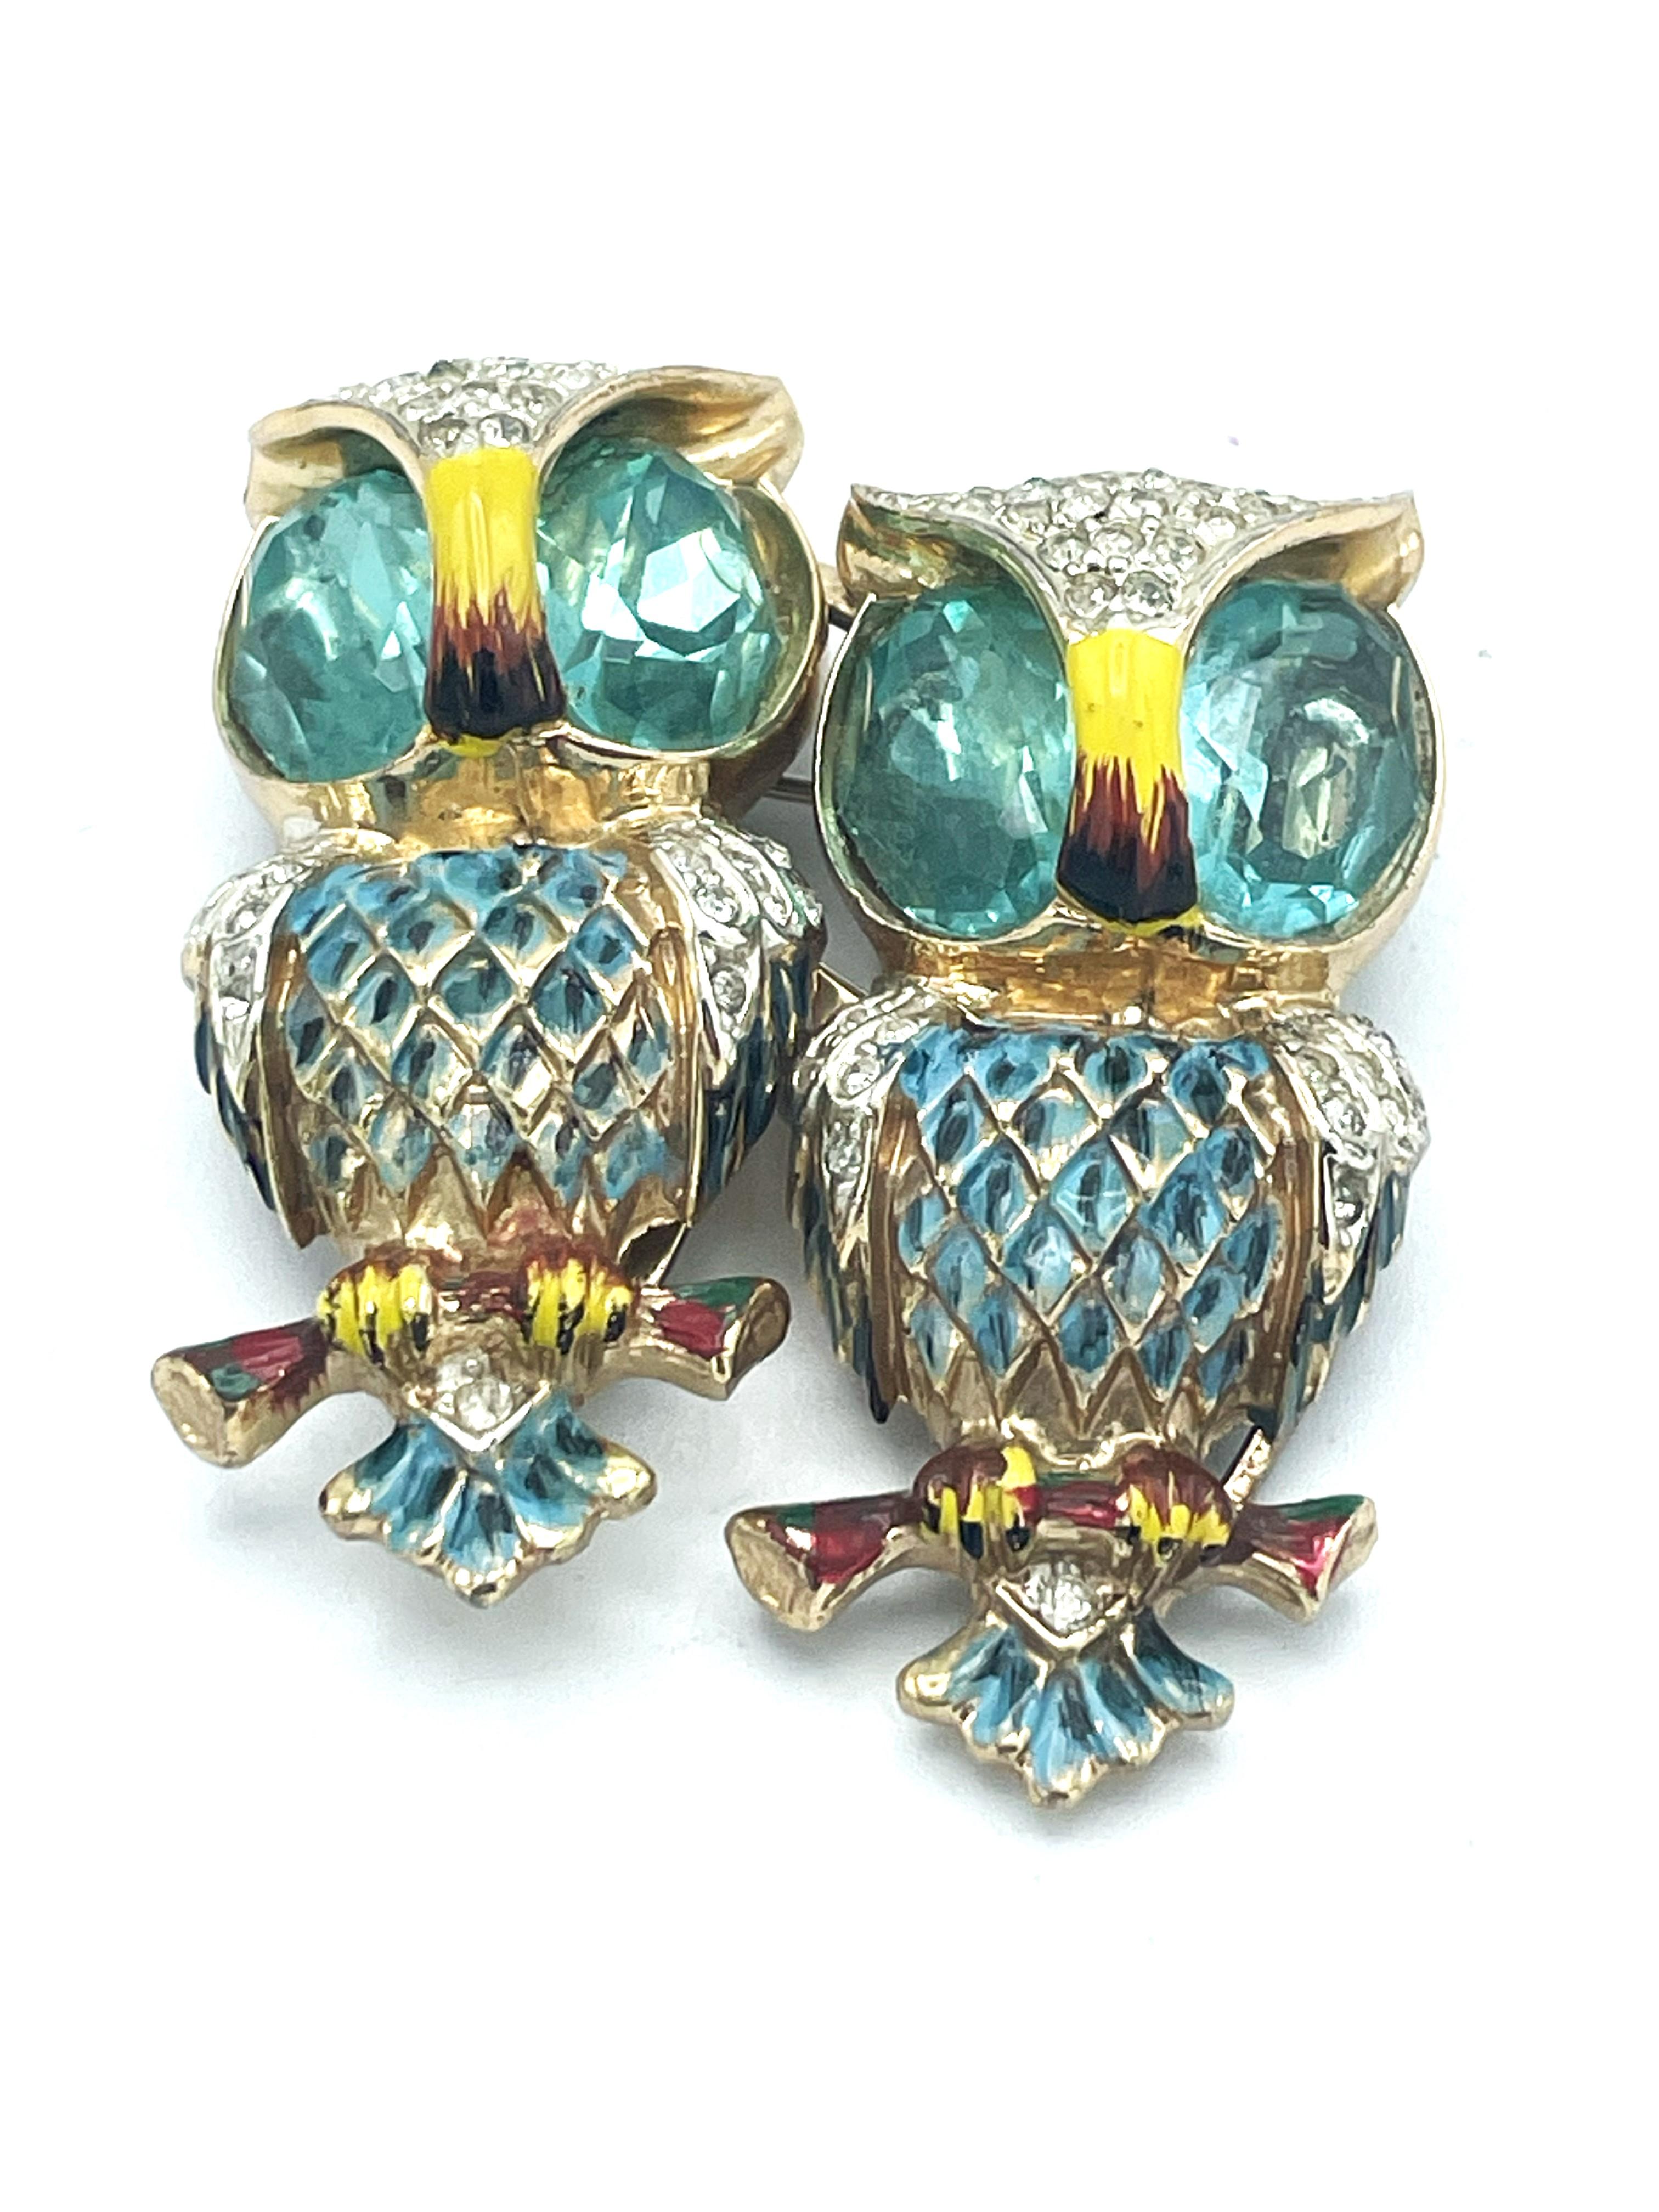 CORO DUETT OWL BROOCH, dating 1944 Sterling Silver, USA aquamarines and enamel  In Good Condition For Sale In Stuttgart, DE